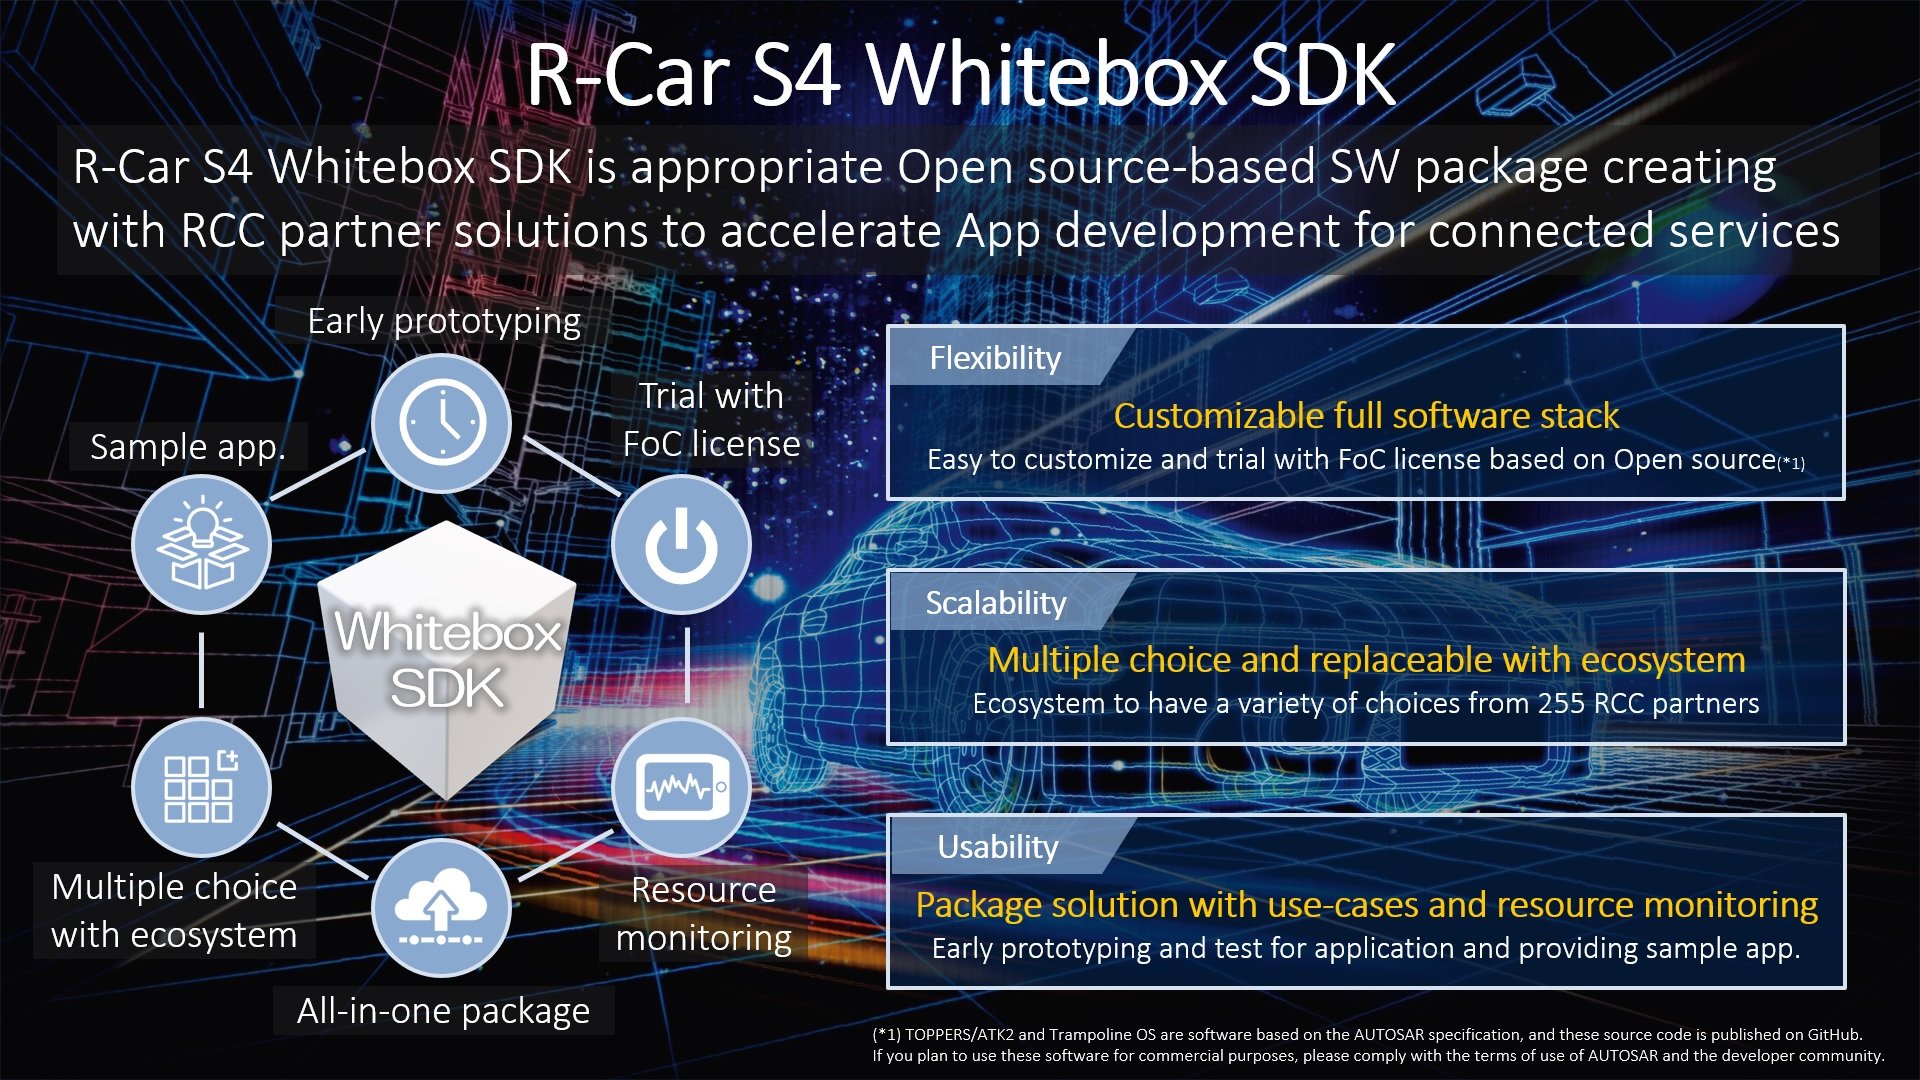 R-Car S4 Whitebox SDK is appropreate Open source-based SW package